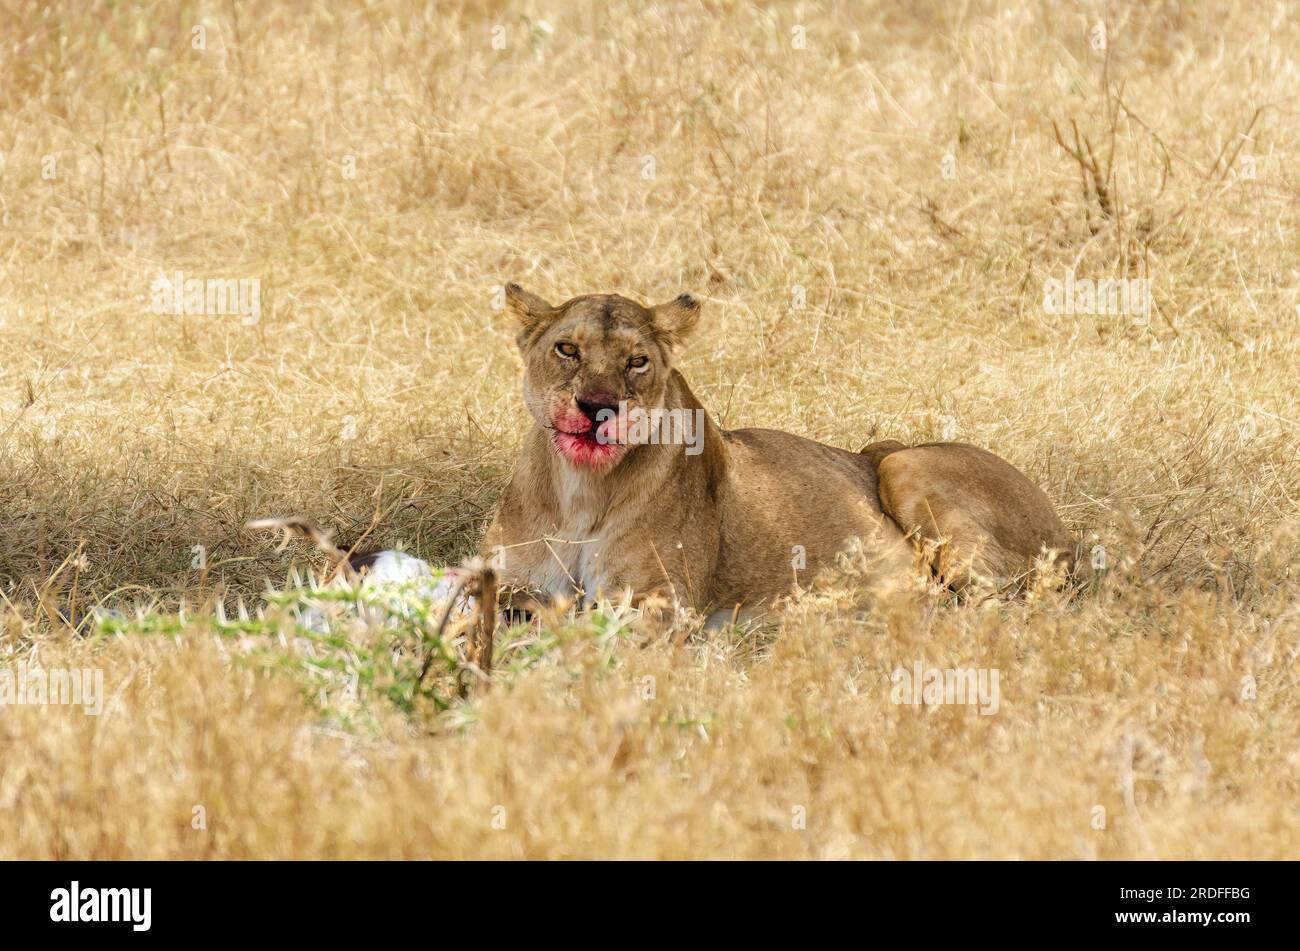 PHOTOGRAPH OF A LION TAKEN FROM A TOYOTA LAND CRUISER IN THE SERENGETI NATIONAL PARK IN TANZANIA IN AUGUST 2022 Stock Photo